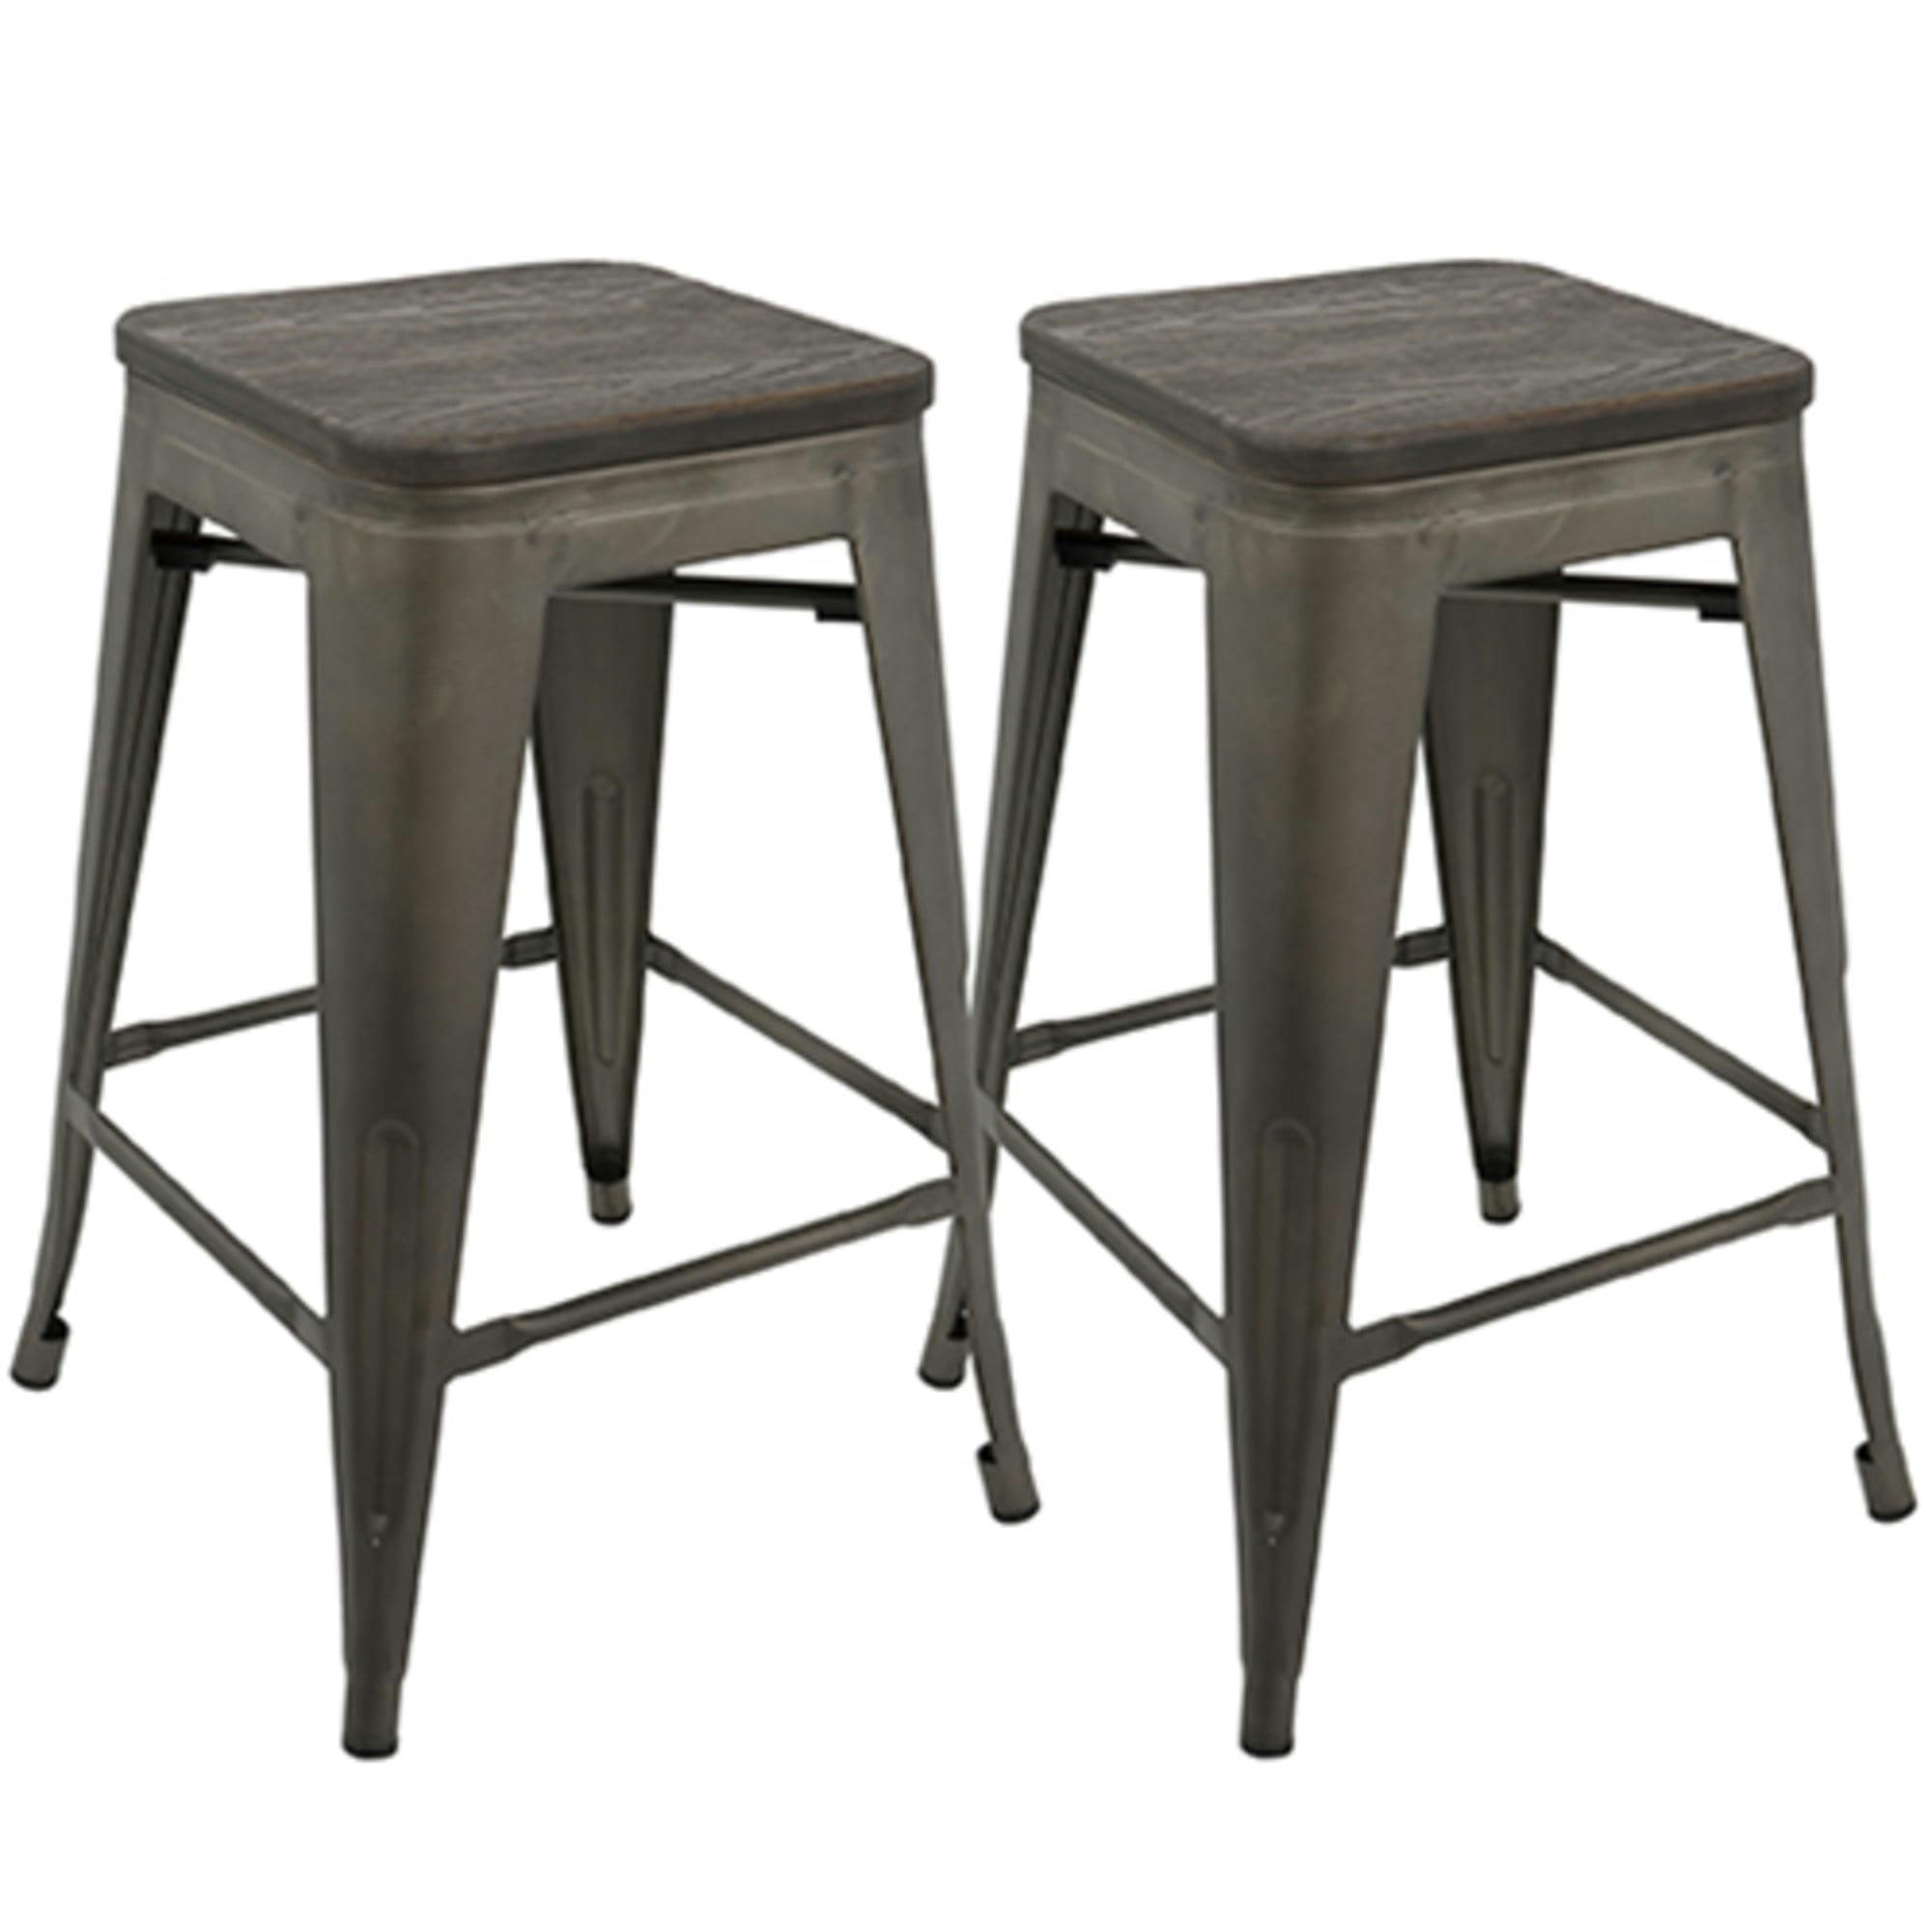 Arwen Antique Wood and Metal Stackable Counter Stool Set of 2